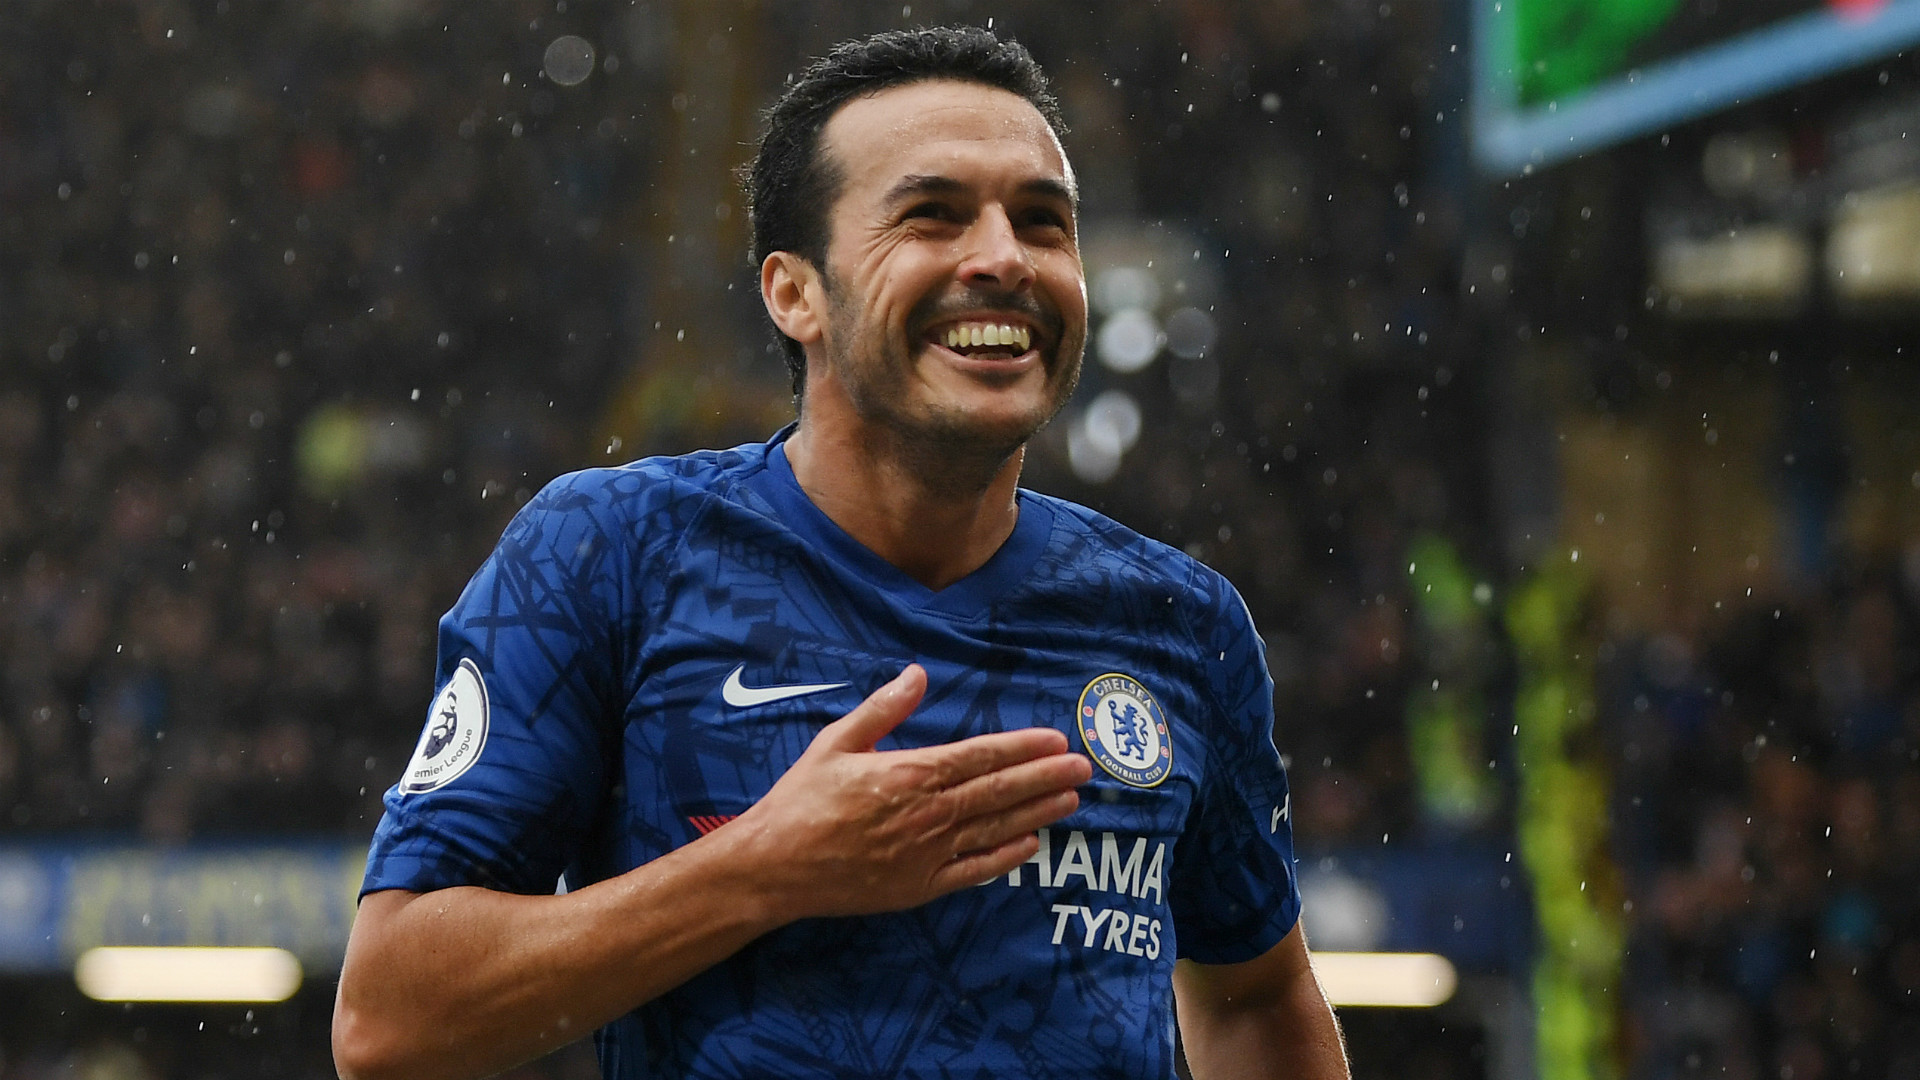 'It's been a pleasure & an honour' - Pedro bids farewell to Chelsea ahead of expected Roma move